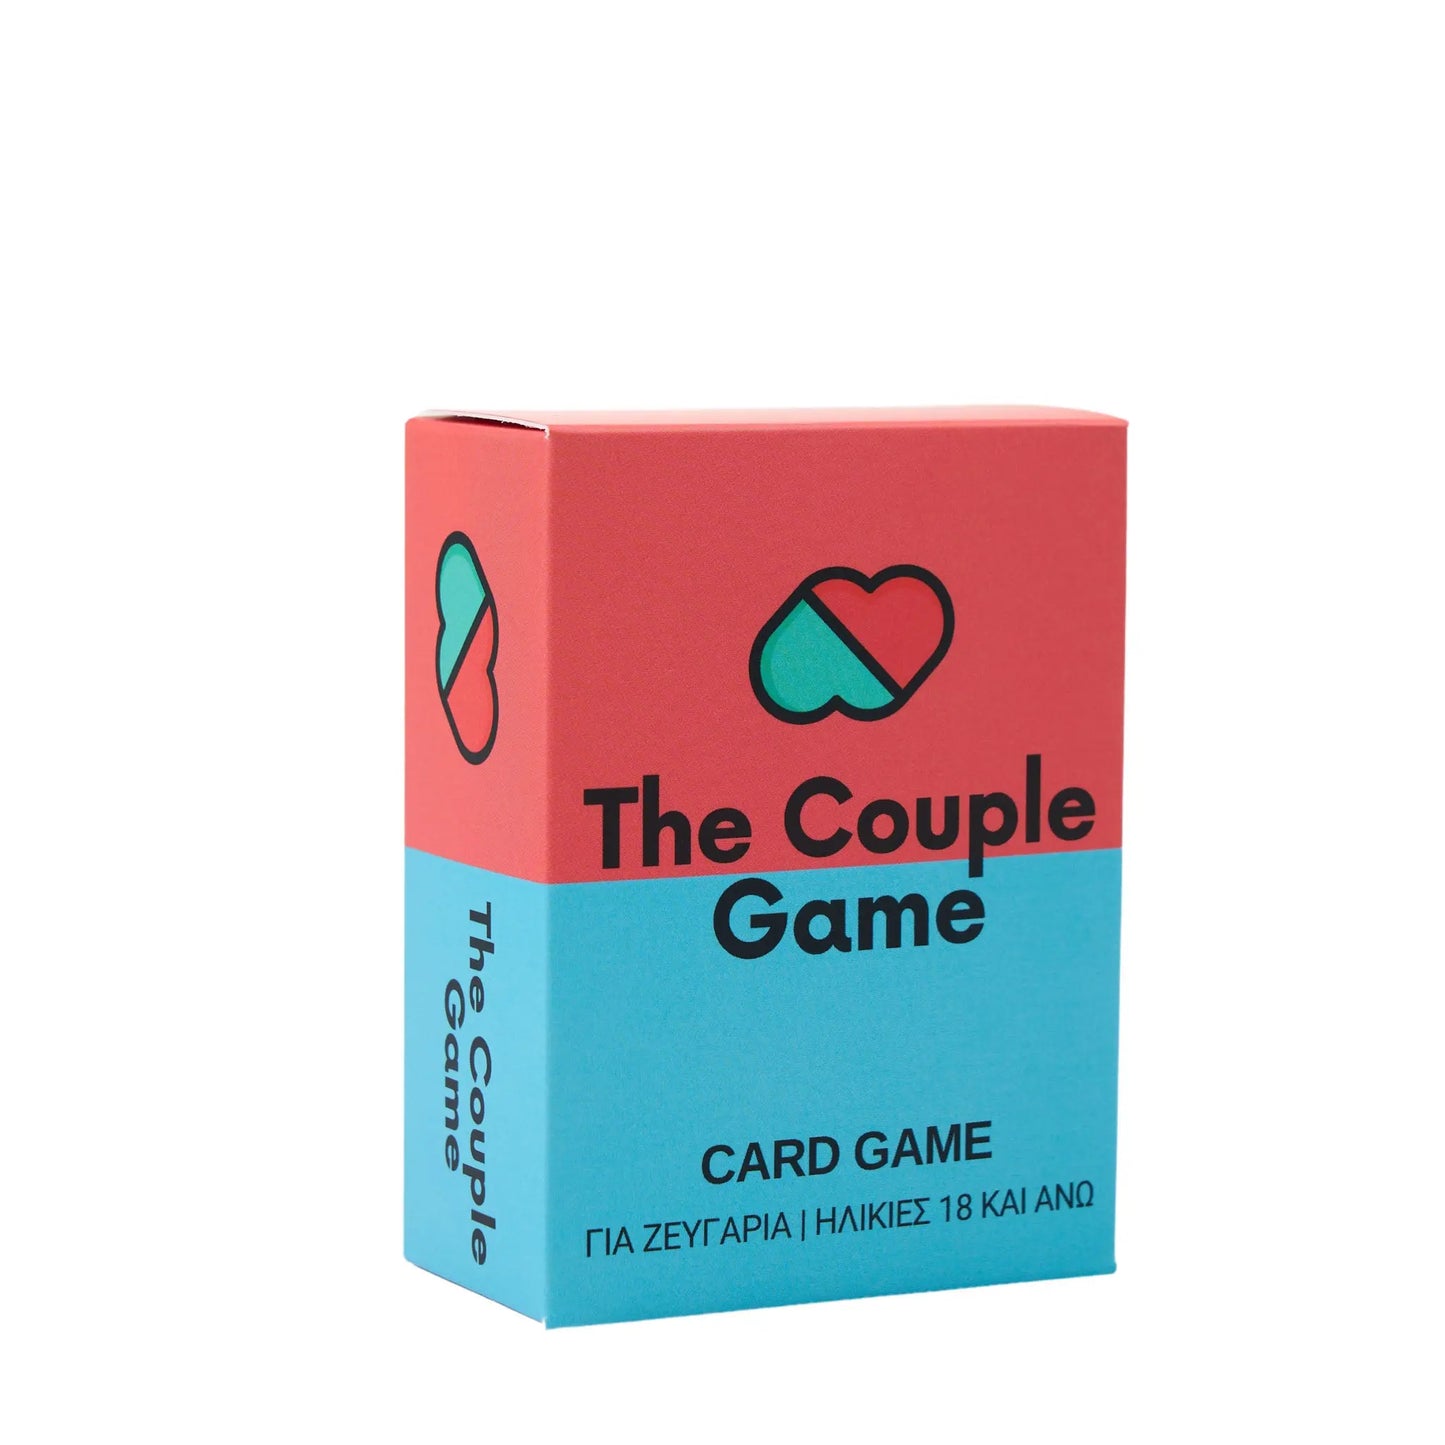 The Couple Game The Couple Game Company